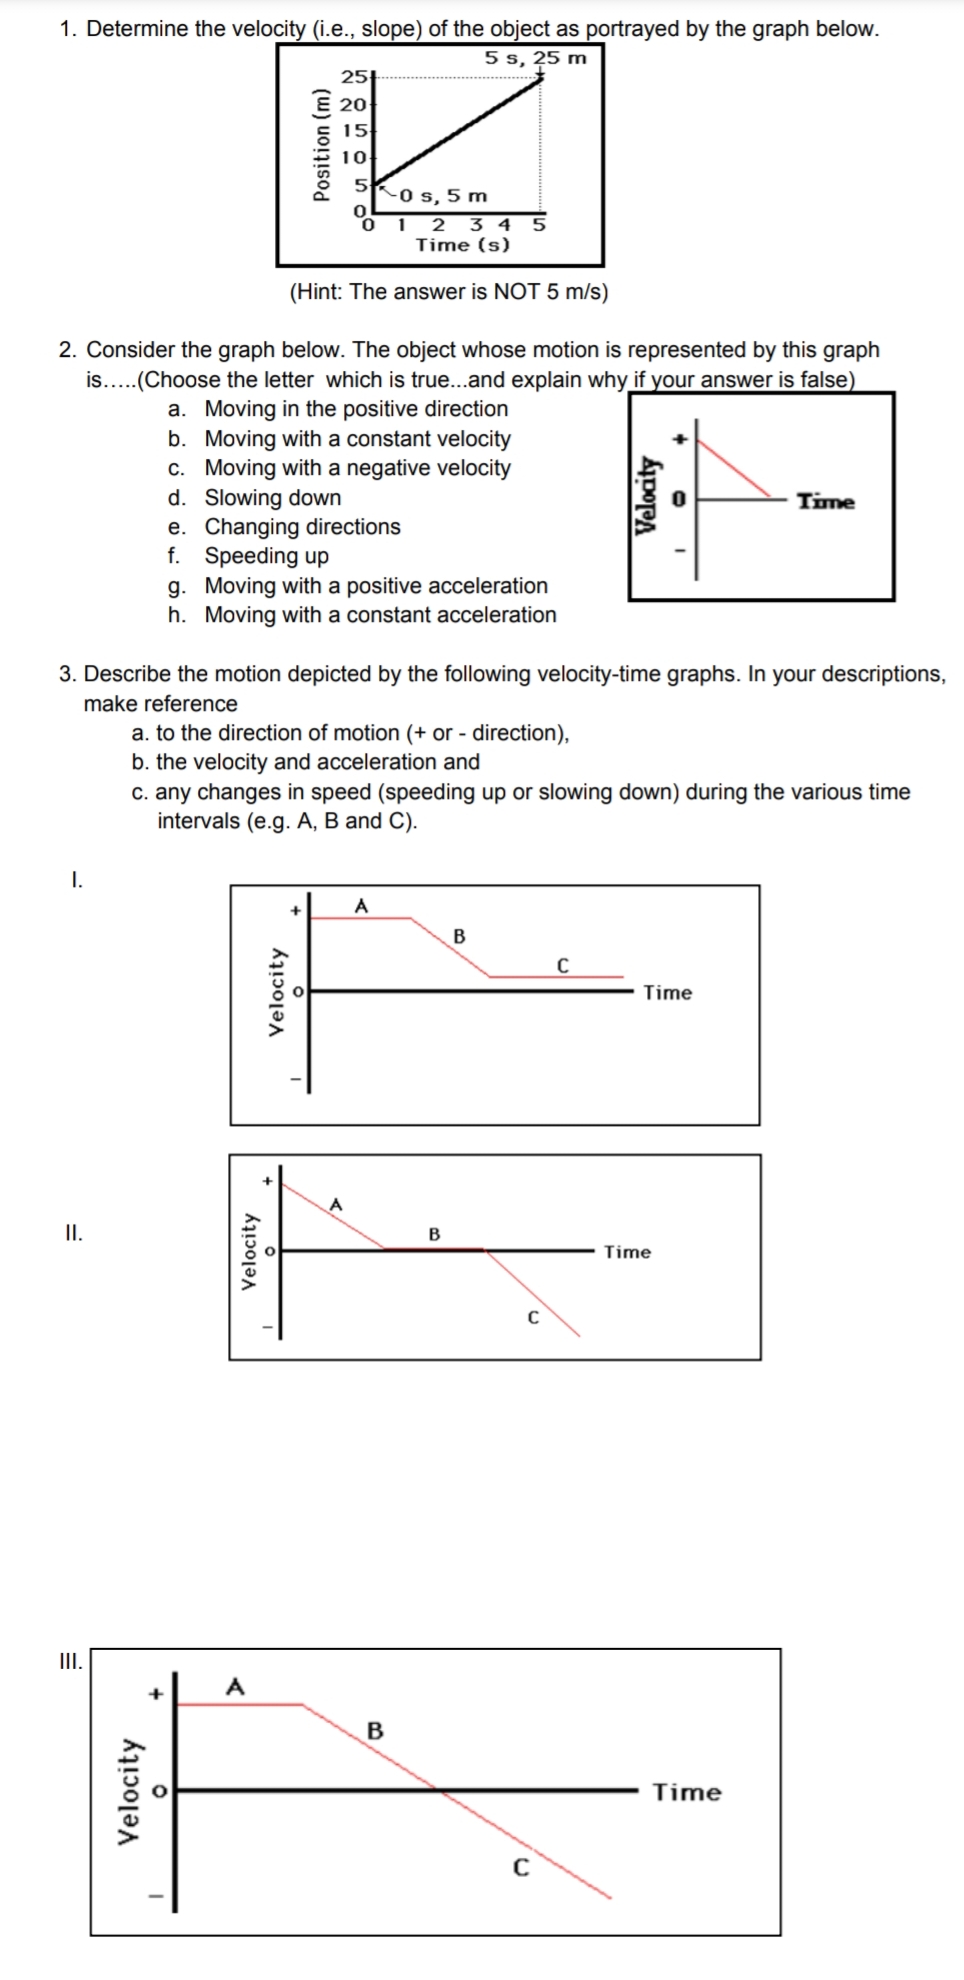 1. Determine the velocity (i.e., slope) of the object as portrayed by the graph below.
5 s, 25 m
2. Consider the graph below. The object whose motion is represented by this graph
is.....(Choose the letter which is true...and explain why if your answer is false)
a. Moving in the positive direction
b.
Moving with a constant velocity
c. Moving with a negative velocity
d. Slowing down
I.
II.
III.
Velocity
25
20
15
K
10
5
-0 s, 5 m
0
0
1 2 3 4 5
Time (s)
(Hint: The answer is NOT 5 m/s)
e. Changing directions
f.
Speeding up
3. Describe the motion depicted by the following velocity-time graphs. In your descriptions,
make reference
a. to the direction of motion (+ or - direction),
b. the velocity and acceleration and
c. any changes in speed (speeding up or slowing down) during the various time
intervals (e.g. A, B and C).
Position (m)
g. Moving with a positive acceleration
h. Moving with a constant acceleration
Velocity
A
Velocity
A
B
B
B
C
C
Velocity
C
Time
Time
Time
Time